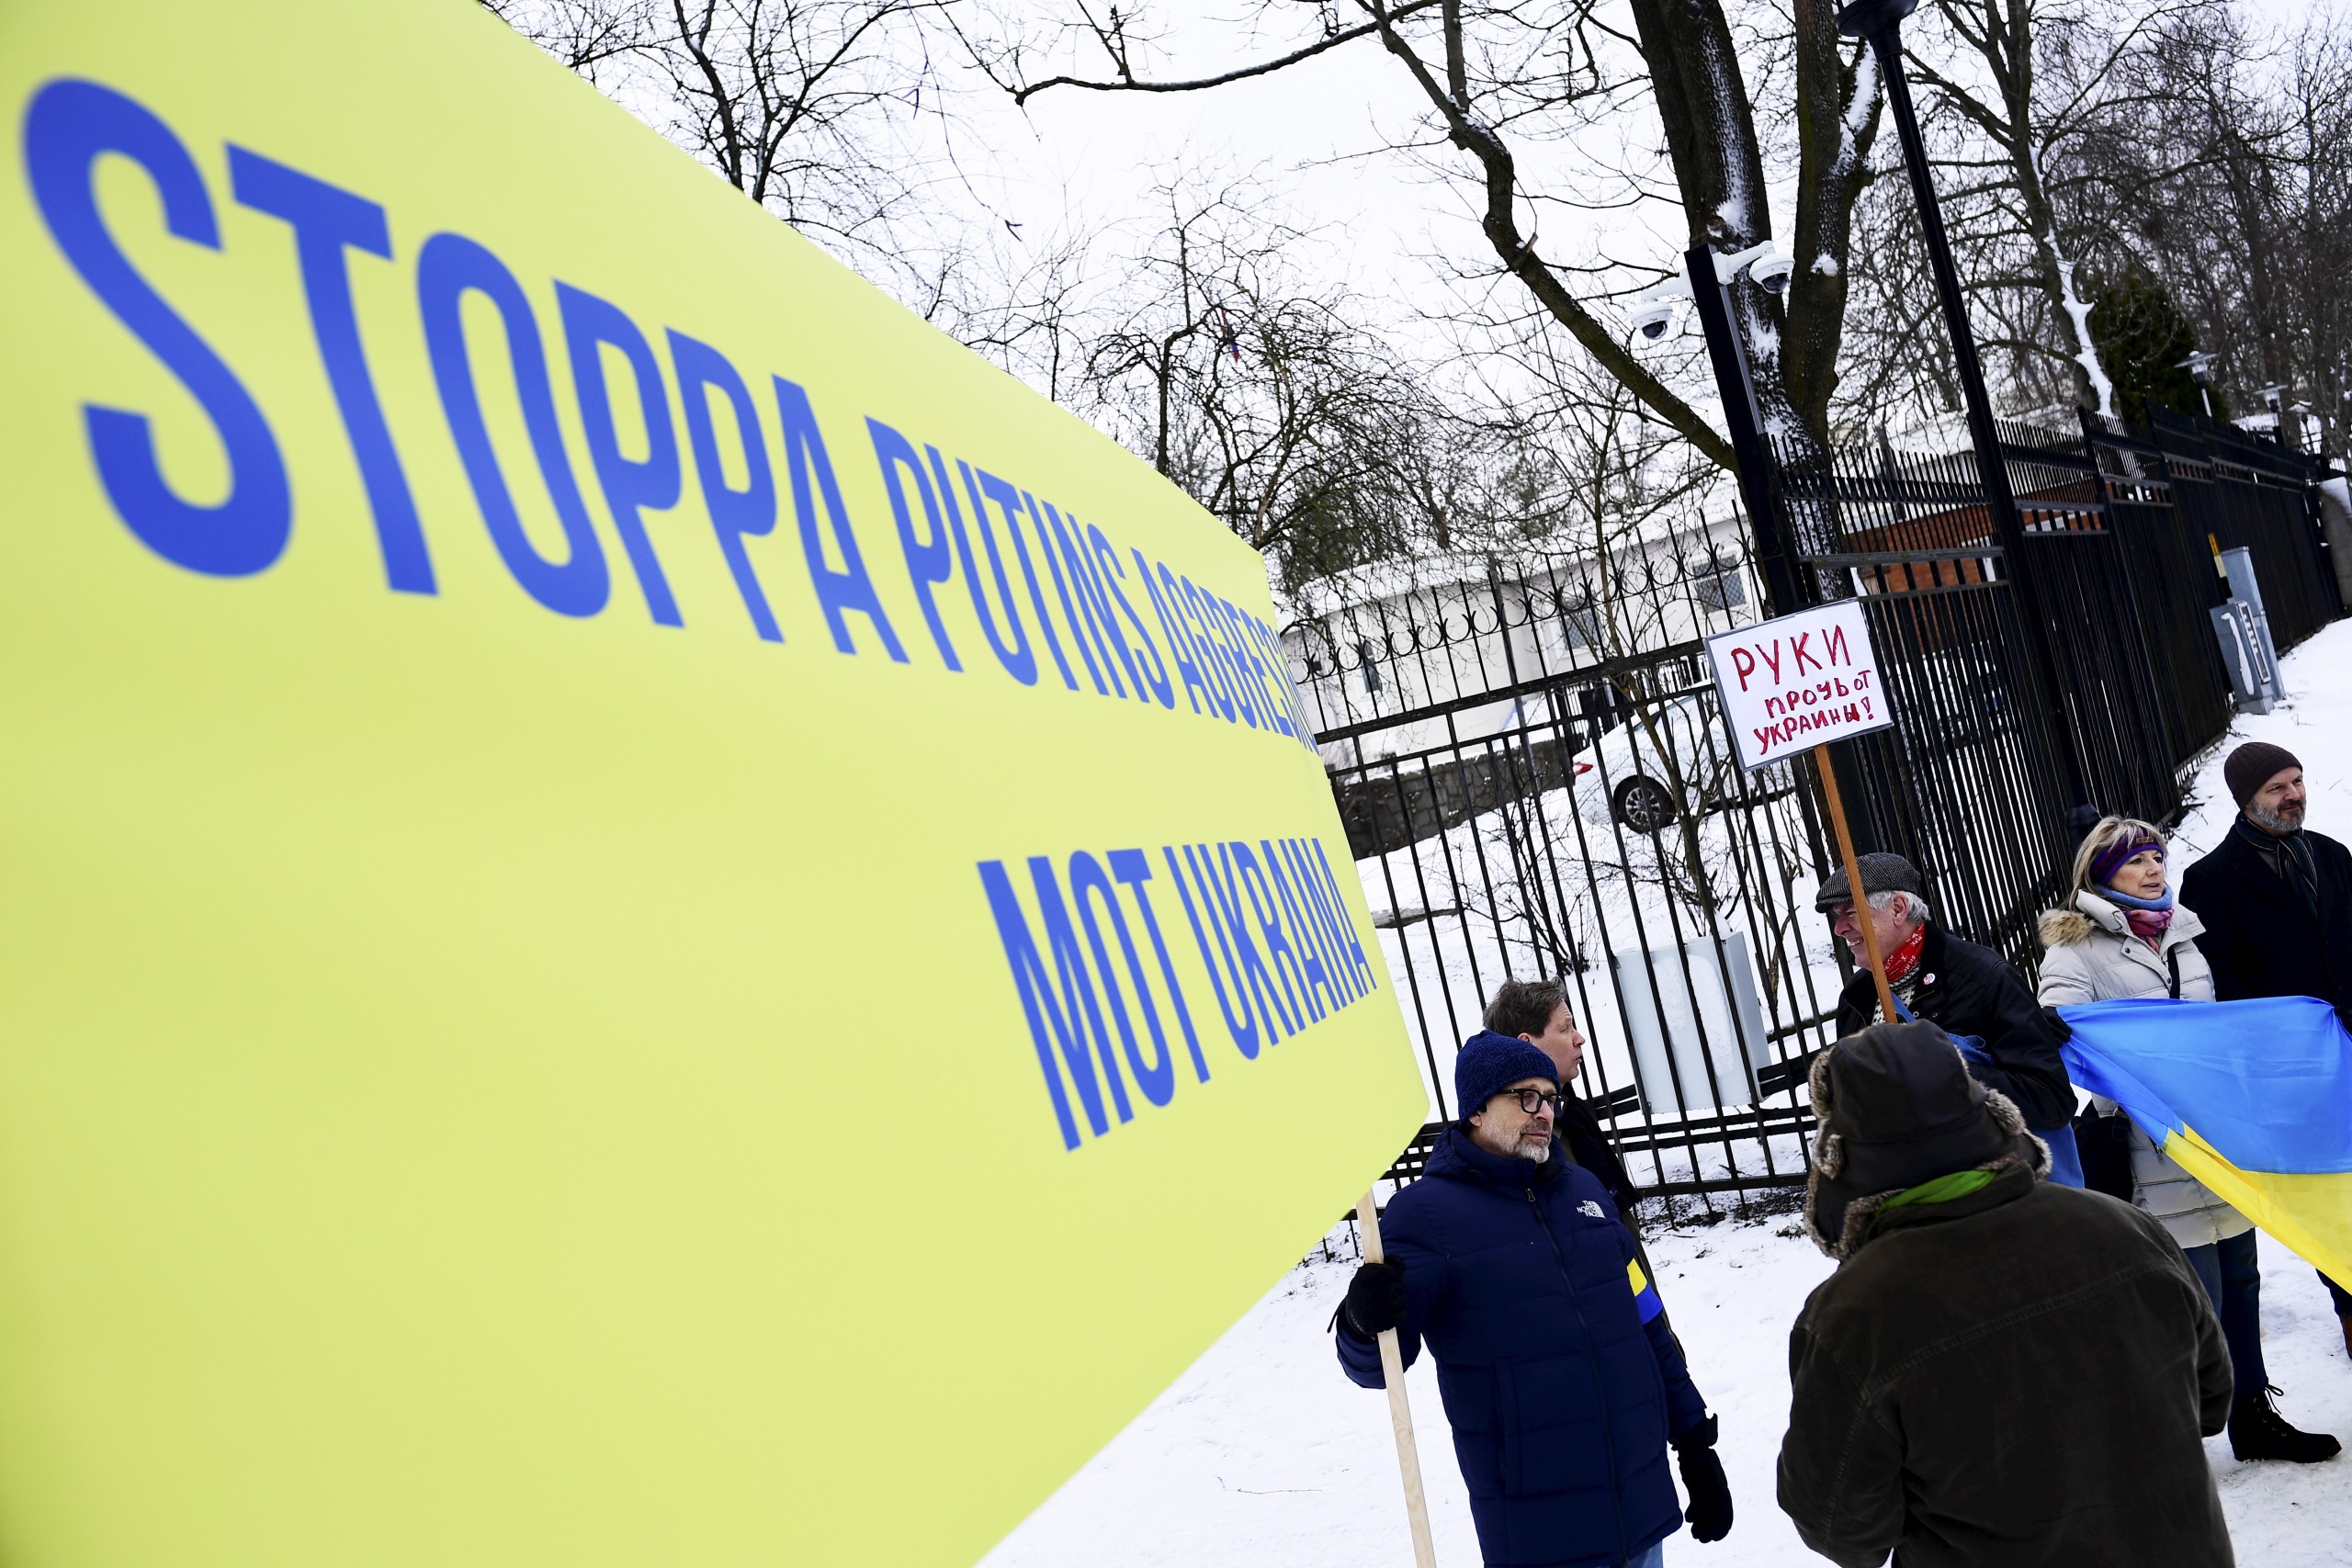 epa09778507 A man holds a banner reading 'Stop Putin's aggressions against Ukraine' during a protest outside the Russian embassy in Stockholm, Sweden, 23 February 2022.  EPA/Paul Wennerholm/TT  SWEDEN OUT